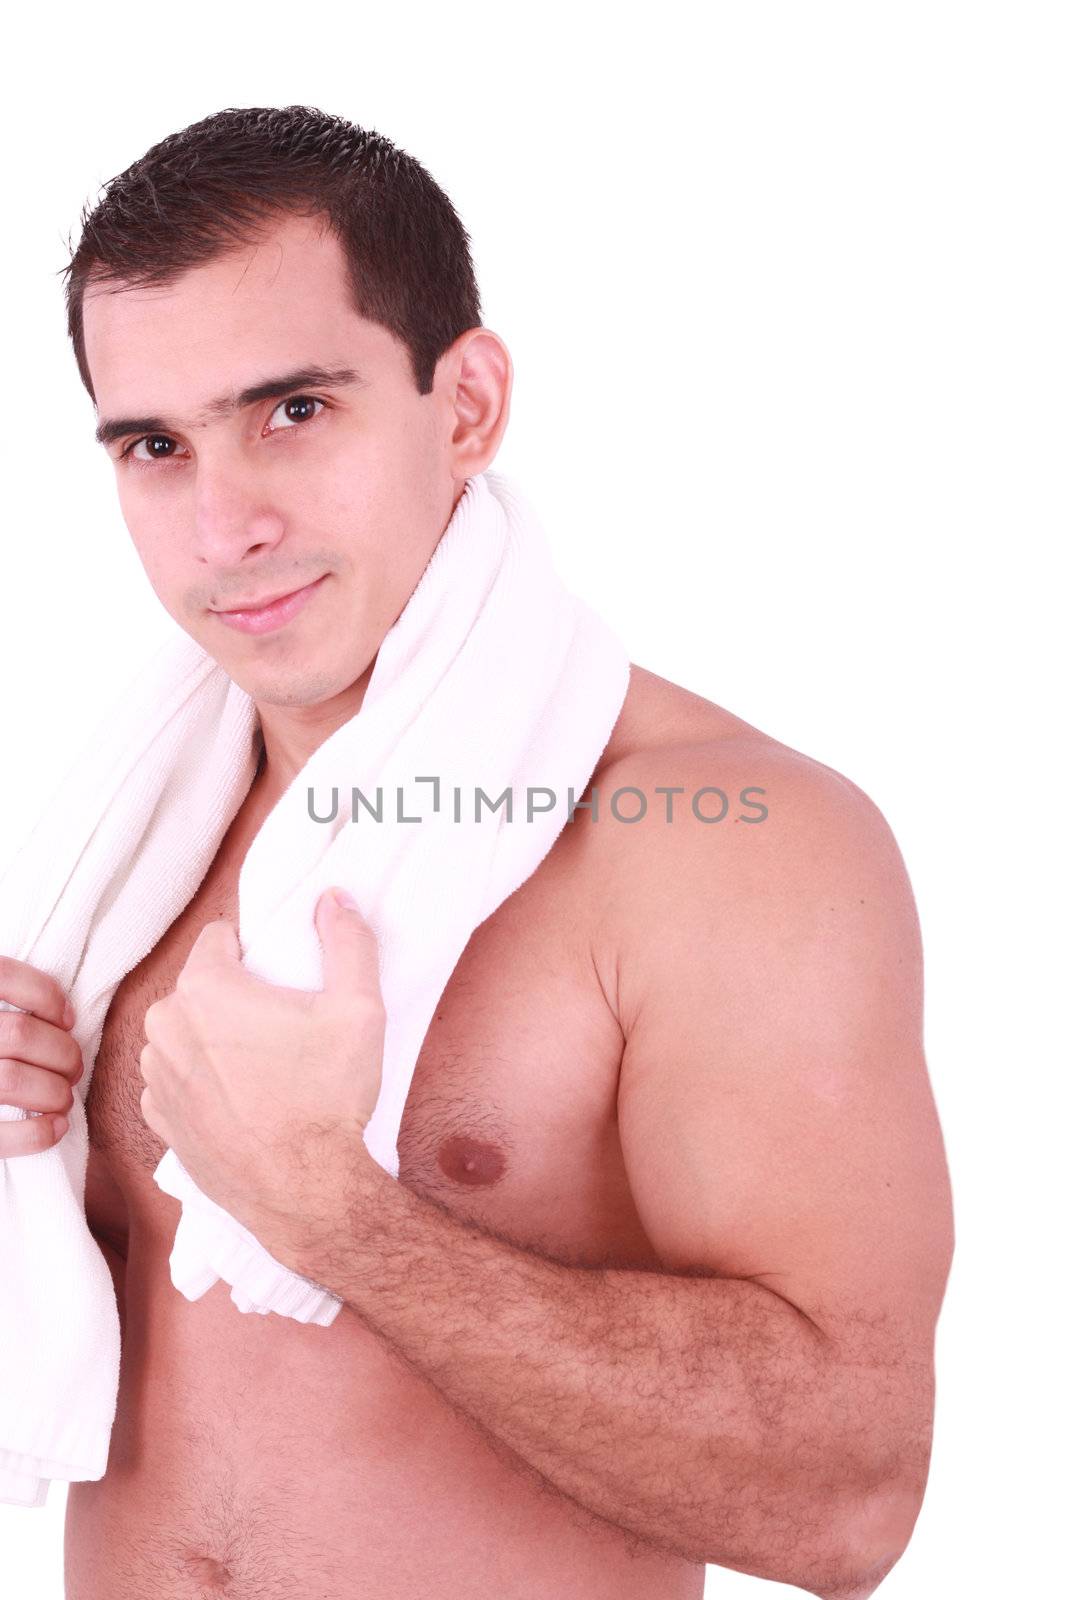 Smart cute attractive guy toweling hair and body skin by dacasdo